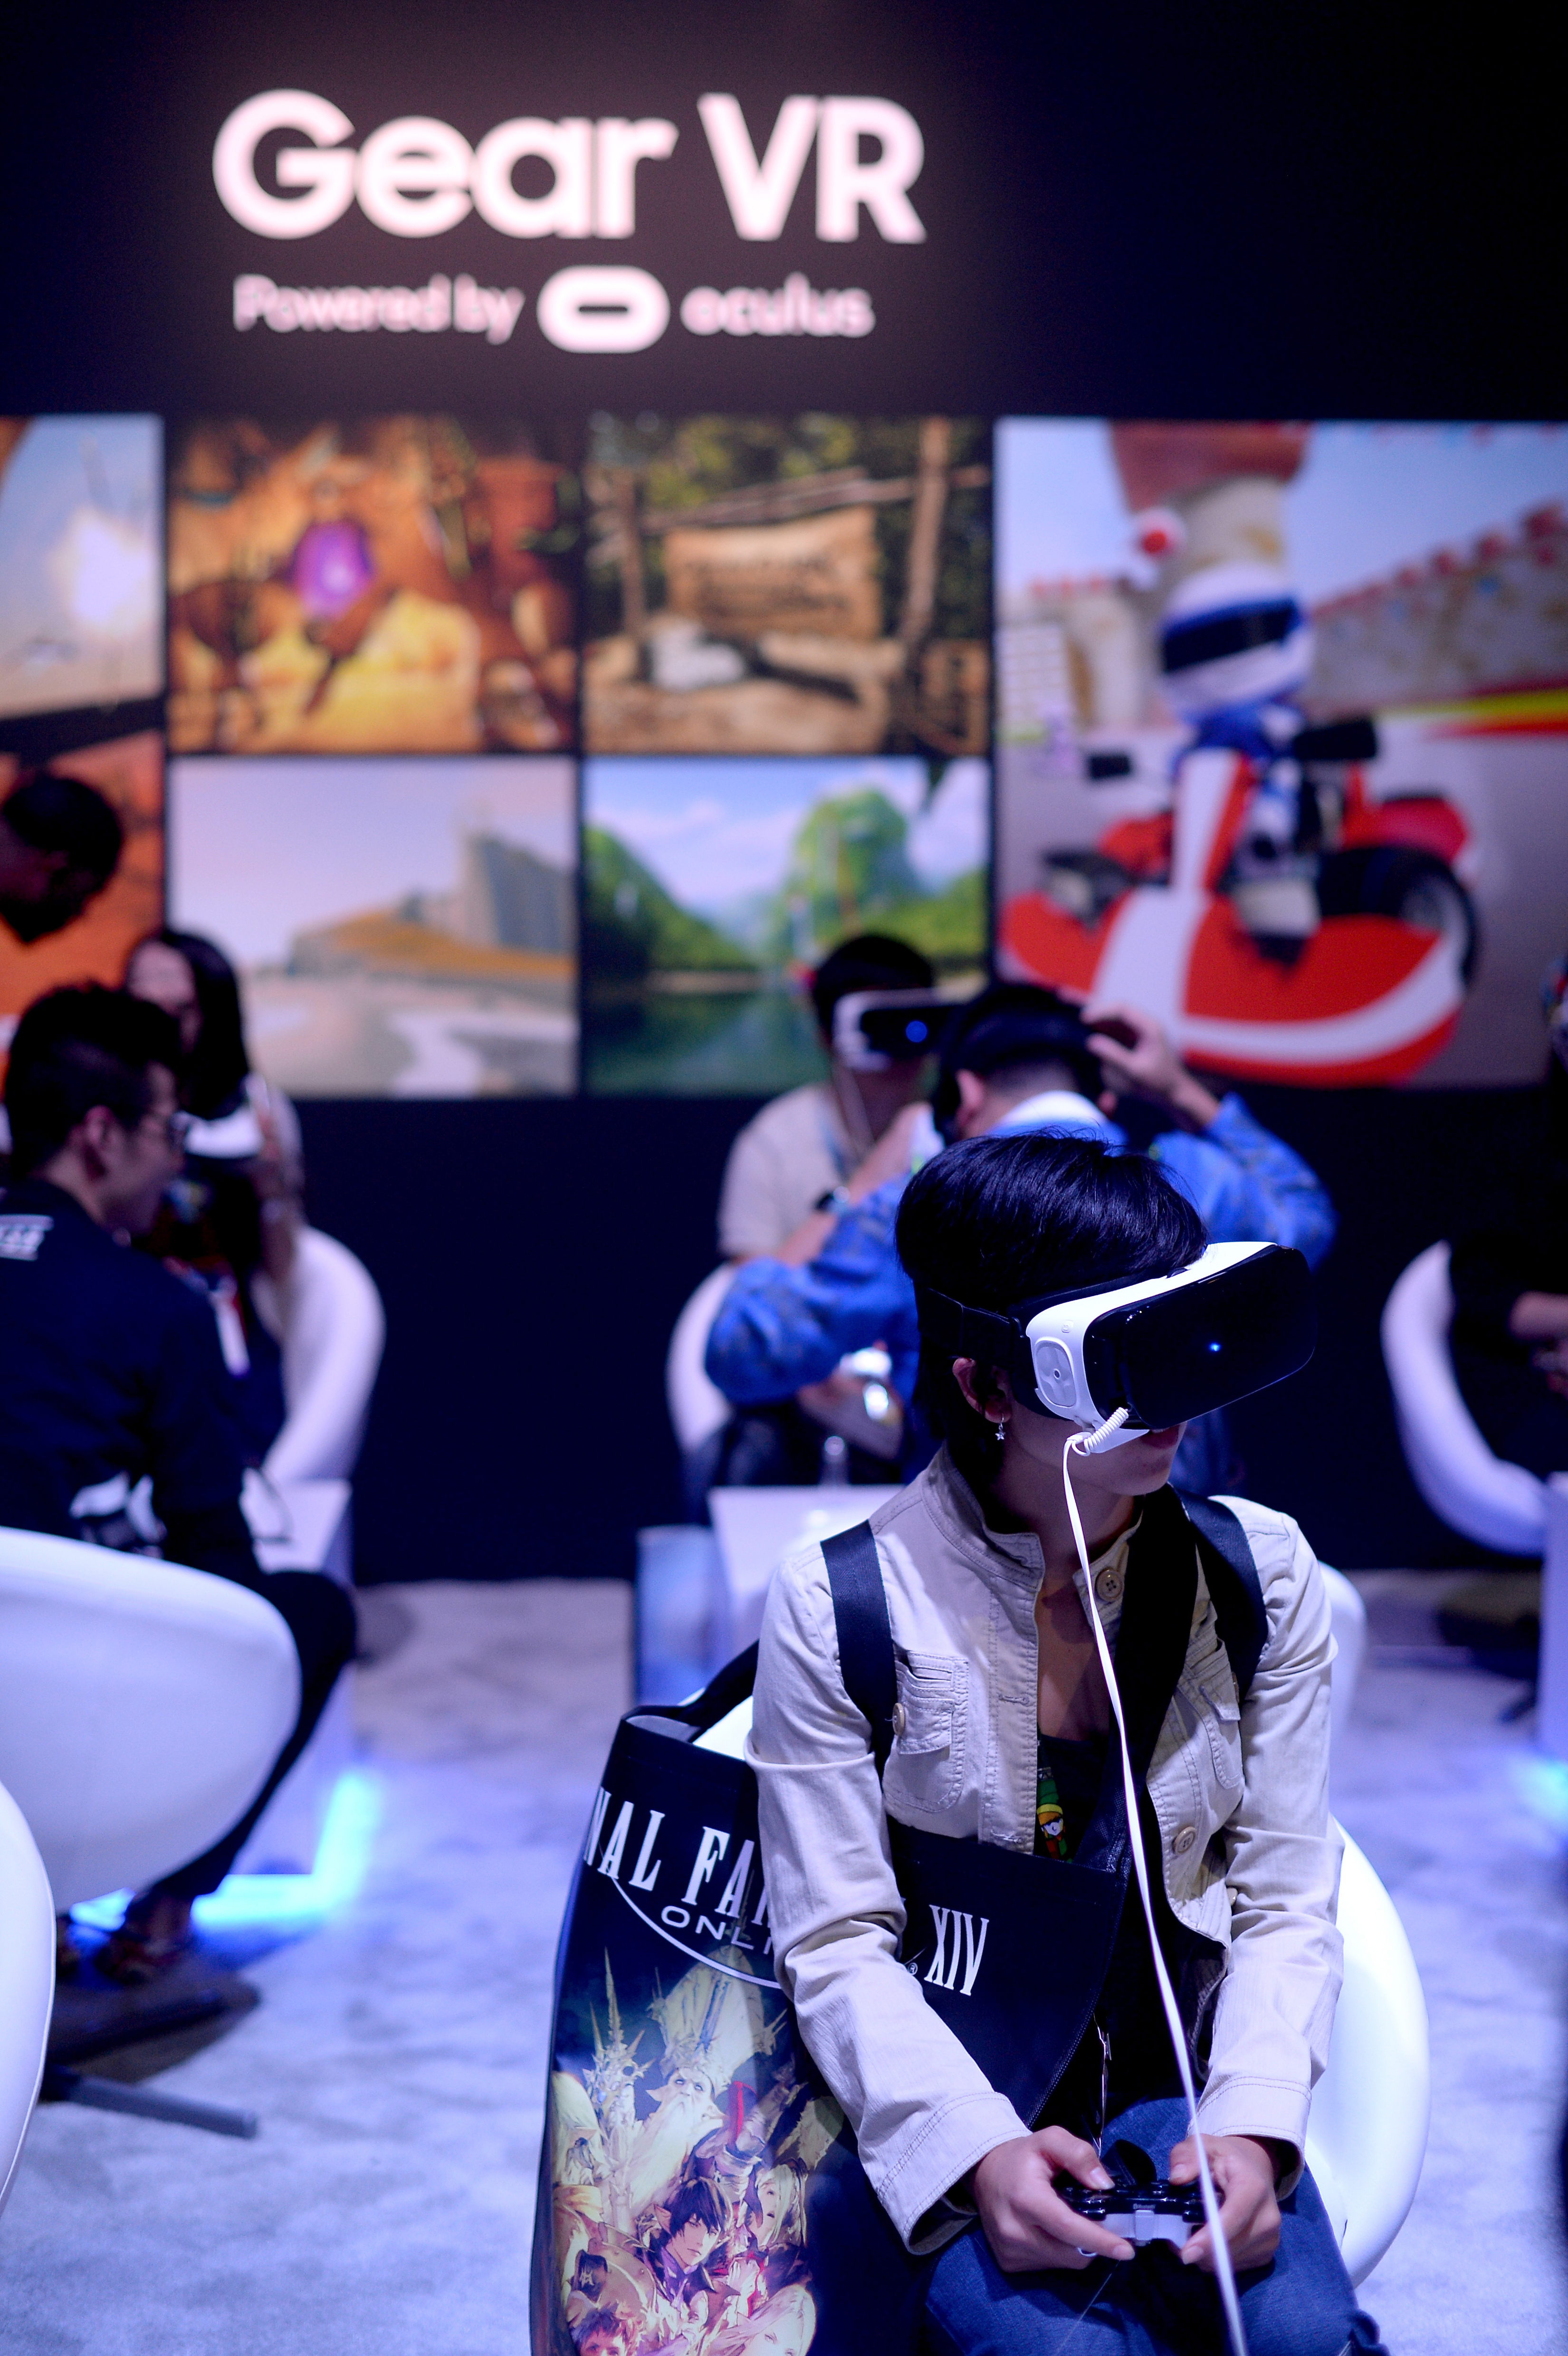 LOS ANGELES, CA - JUNE 14: E3 attendees experience Samsung Gear VR at the Samsung booth at E3 Expo 2016 on June 14, 2016 in Los Angeles, California. (Photo by Charley Gallay/Getty Images for Samsung)